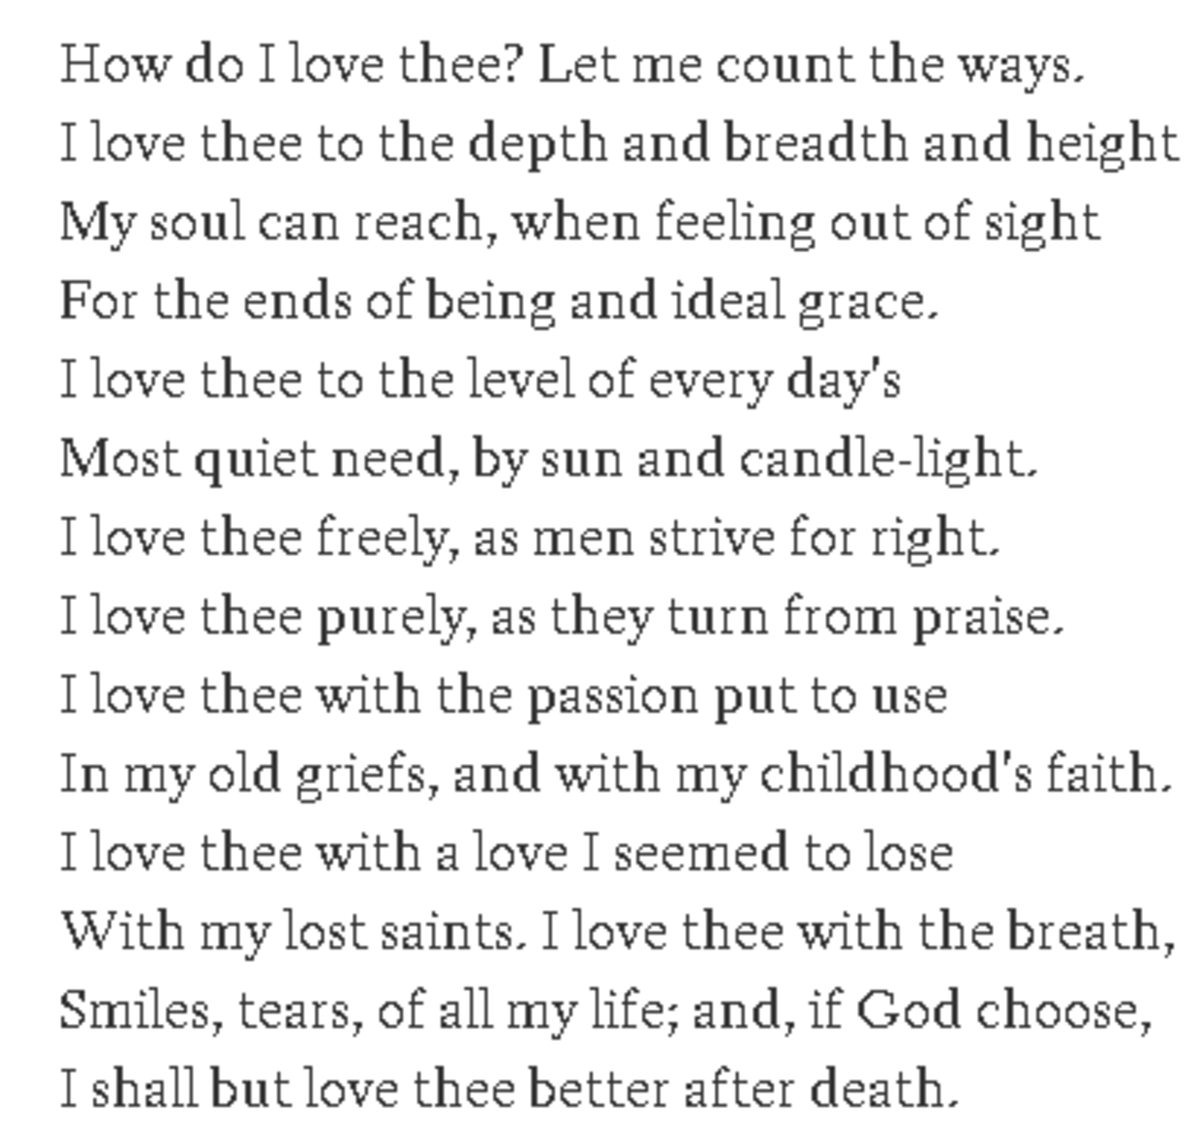 analysis-of-poem-how-do-i-love-thee-by-elizabeth-barrett-browning